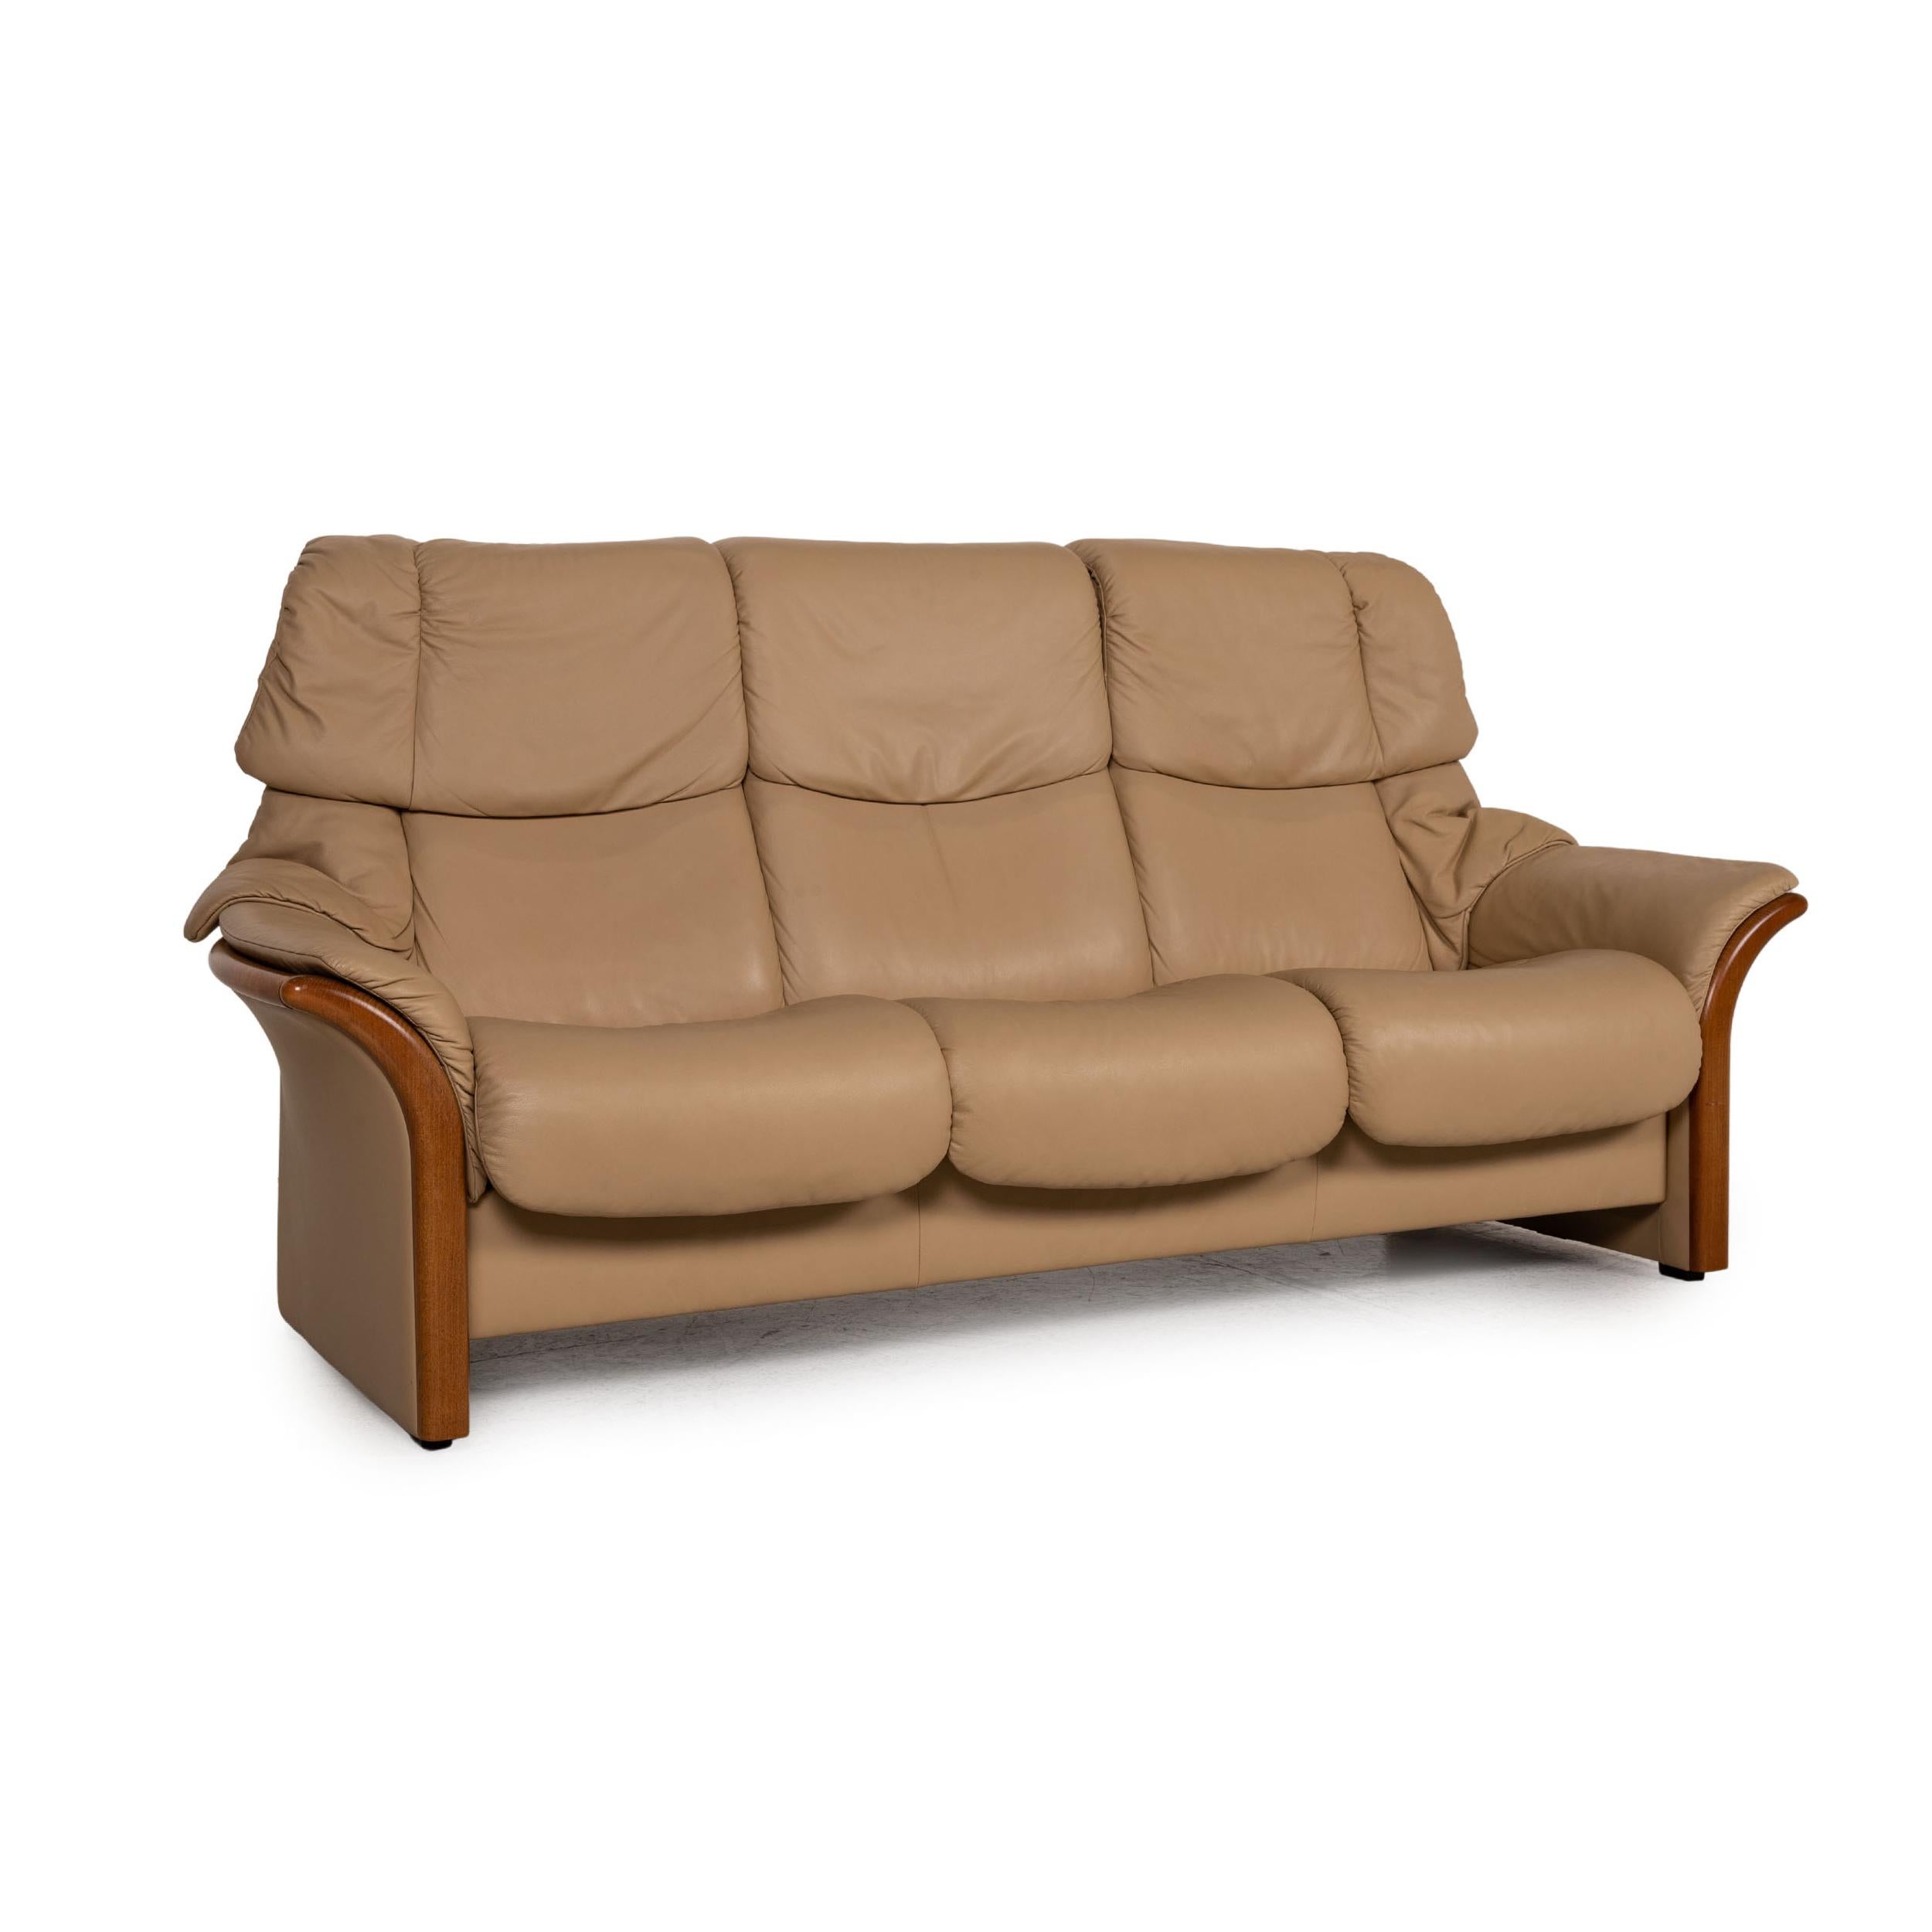 Stressless Eldorado Leather Sofa Beige Three Seater Couch In Good Condition For Sale In Cologne, DE